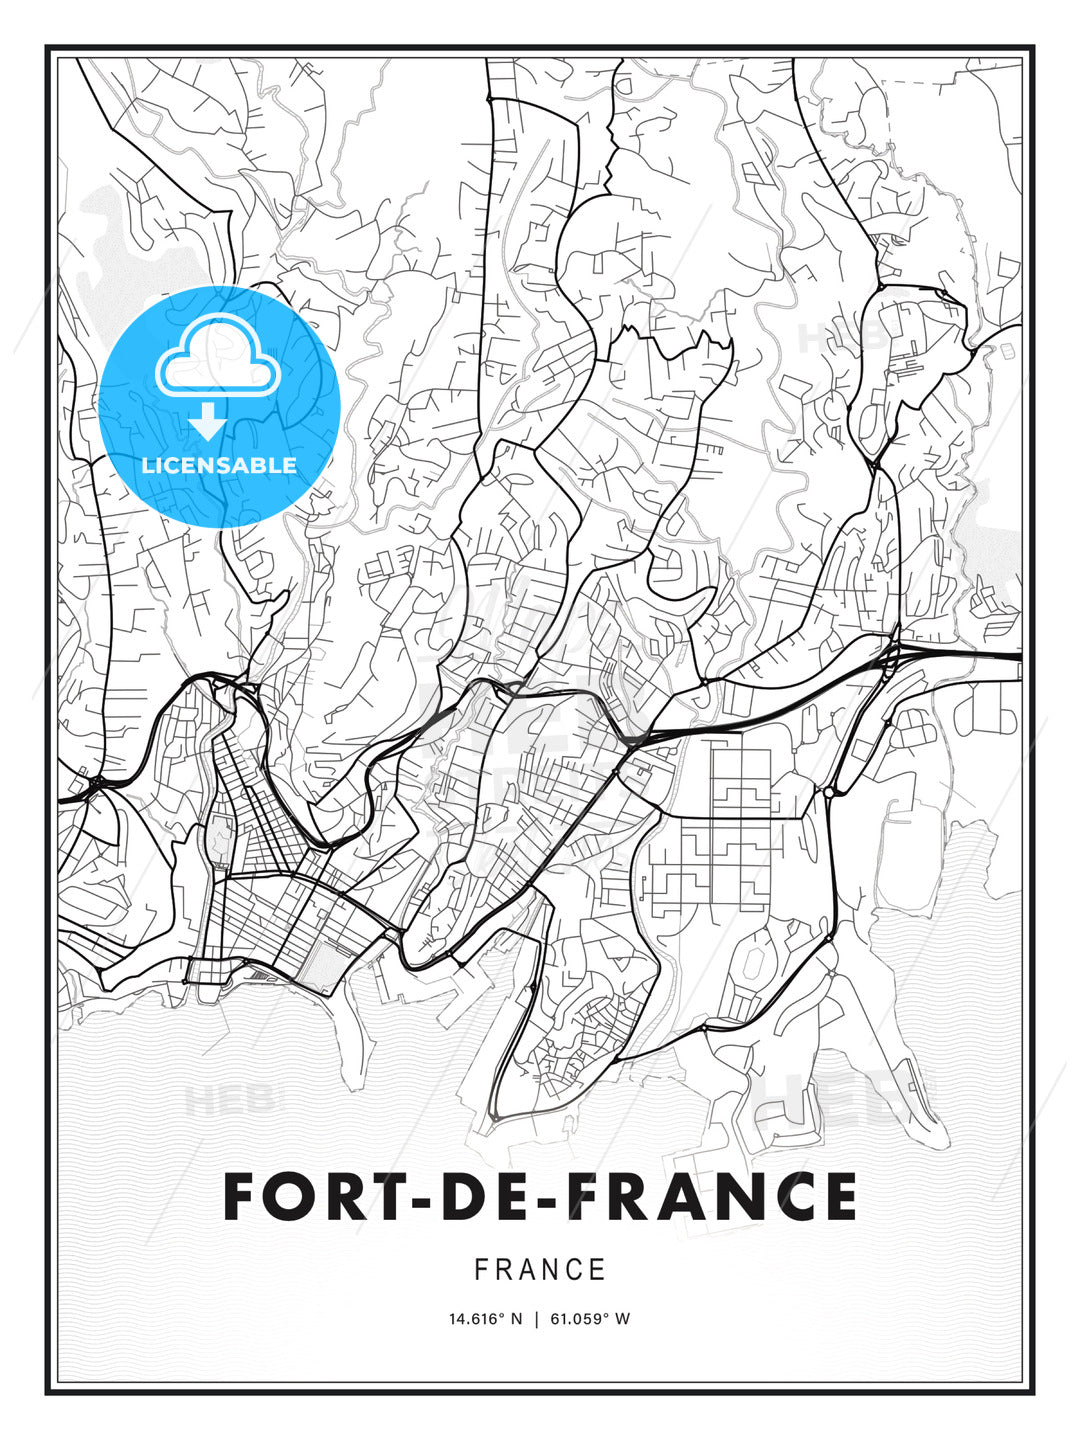 Fort-de-France, France, Modern Print Template in Various Formats - HEBSTREITS Sketches